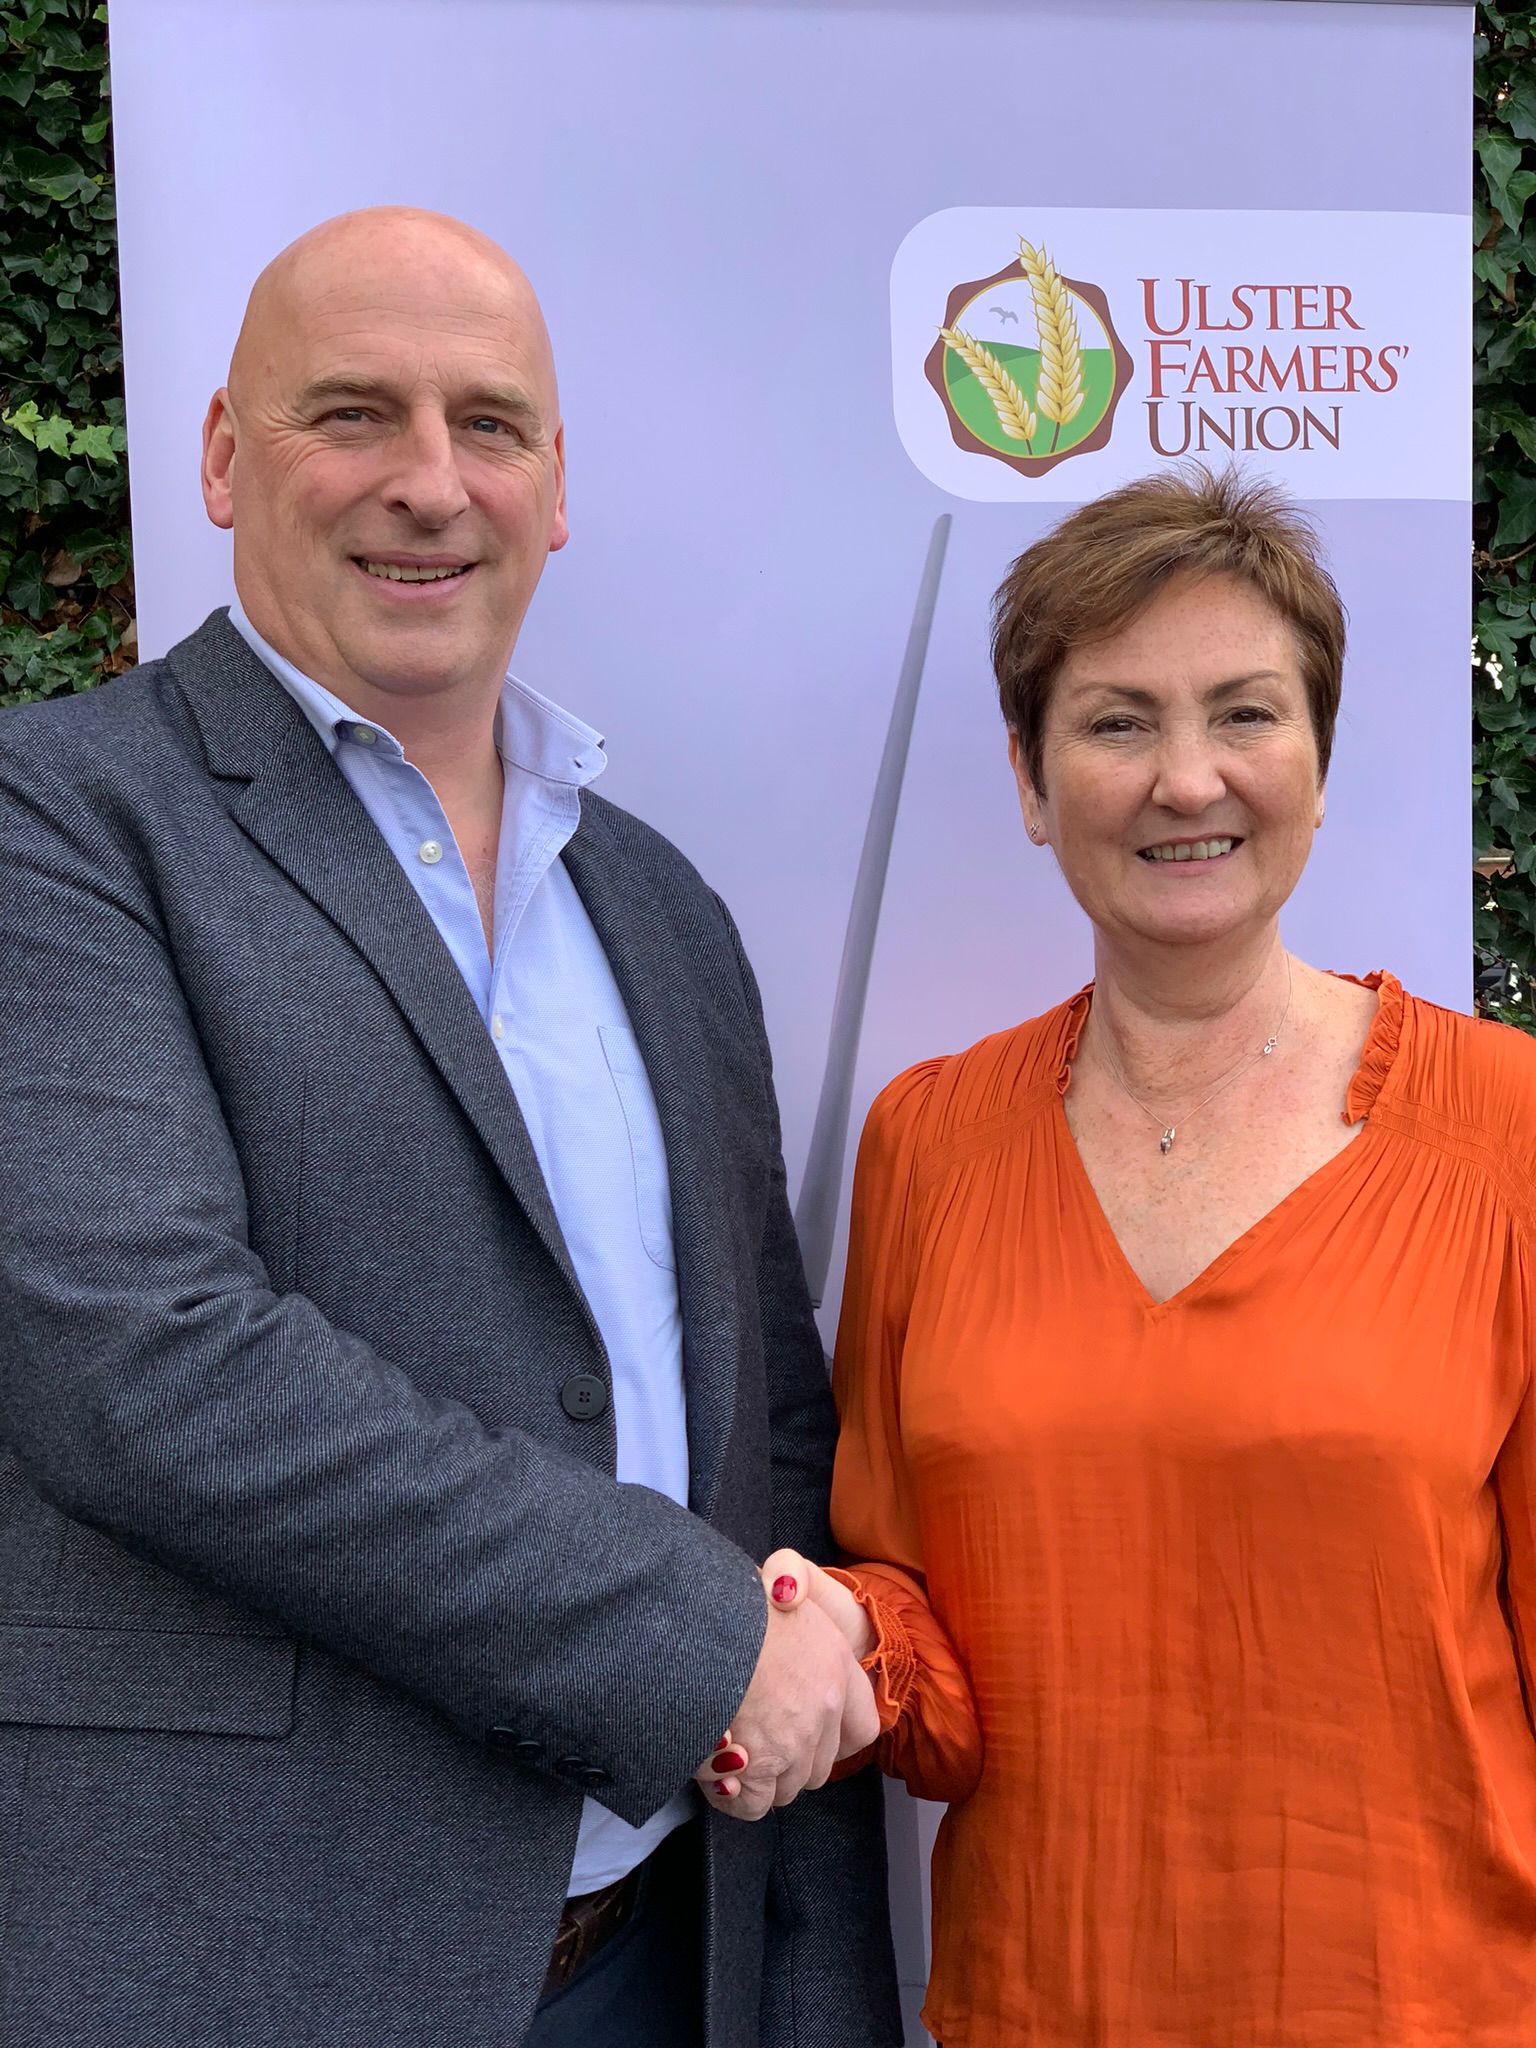 THE ELECTRIC STORAGE COMPANY LAUNCH AFFINITY DEAL WITH ULTSER FARMERS UNION